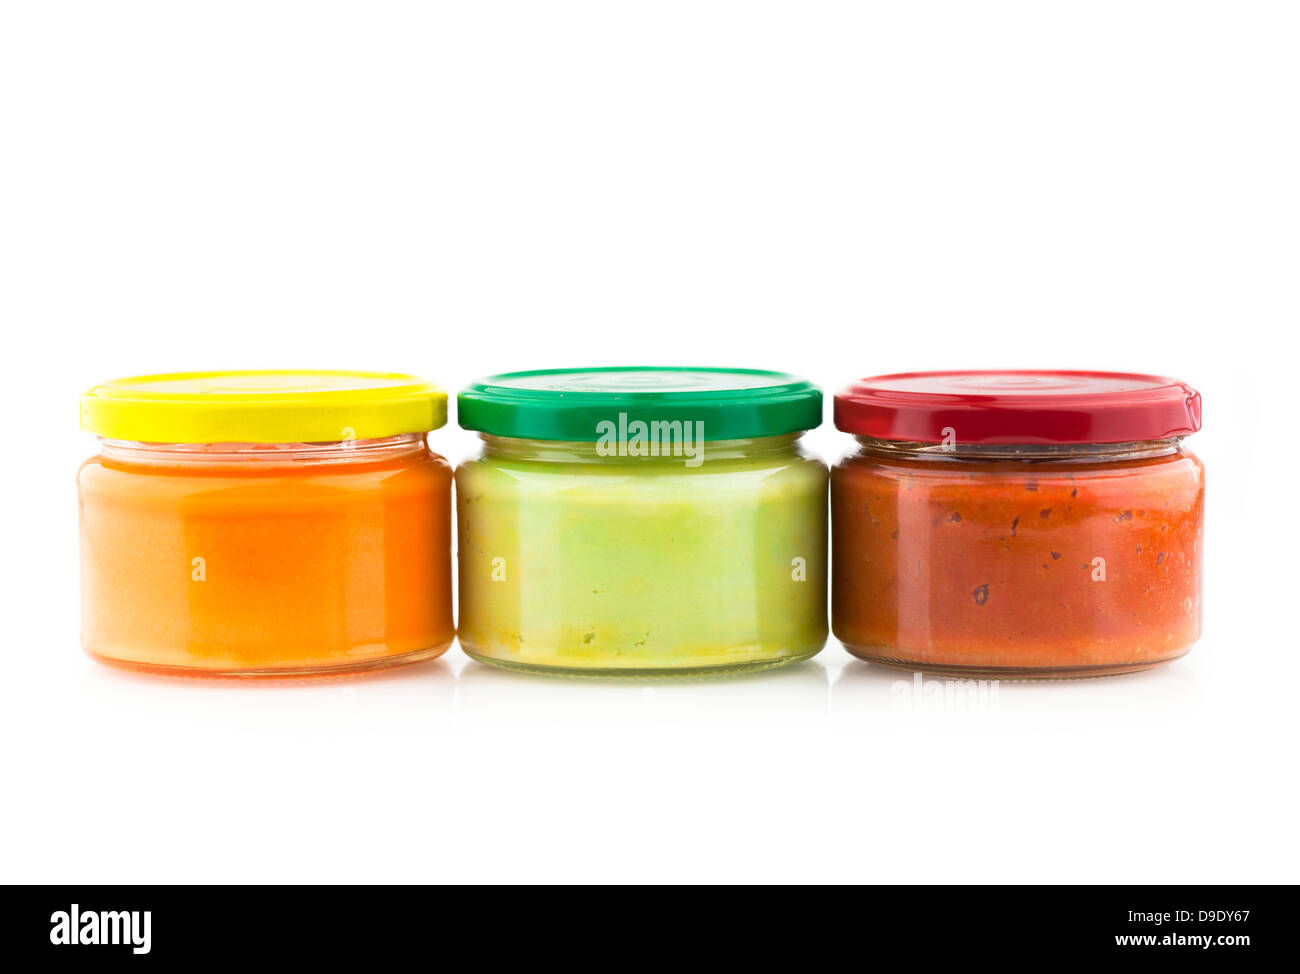 Traditional Mexican dips made of cheese, guacamole and tomato chutney in jars. Stock Photo